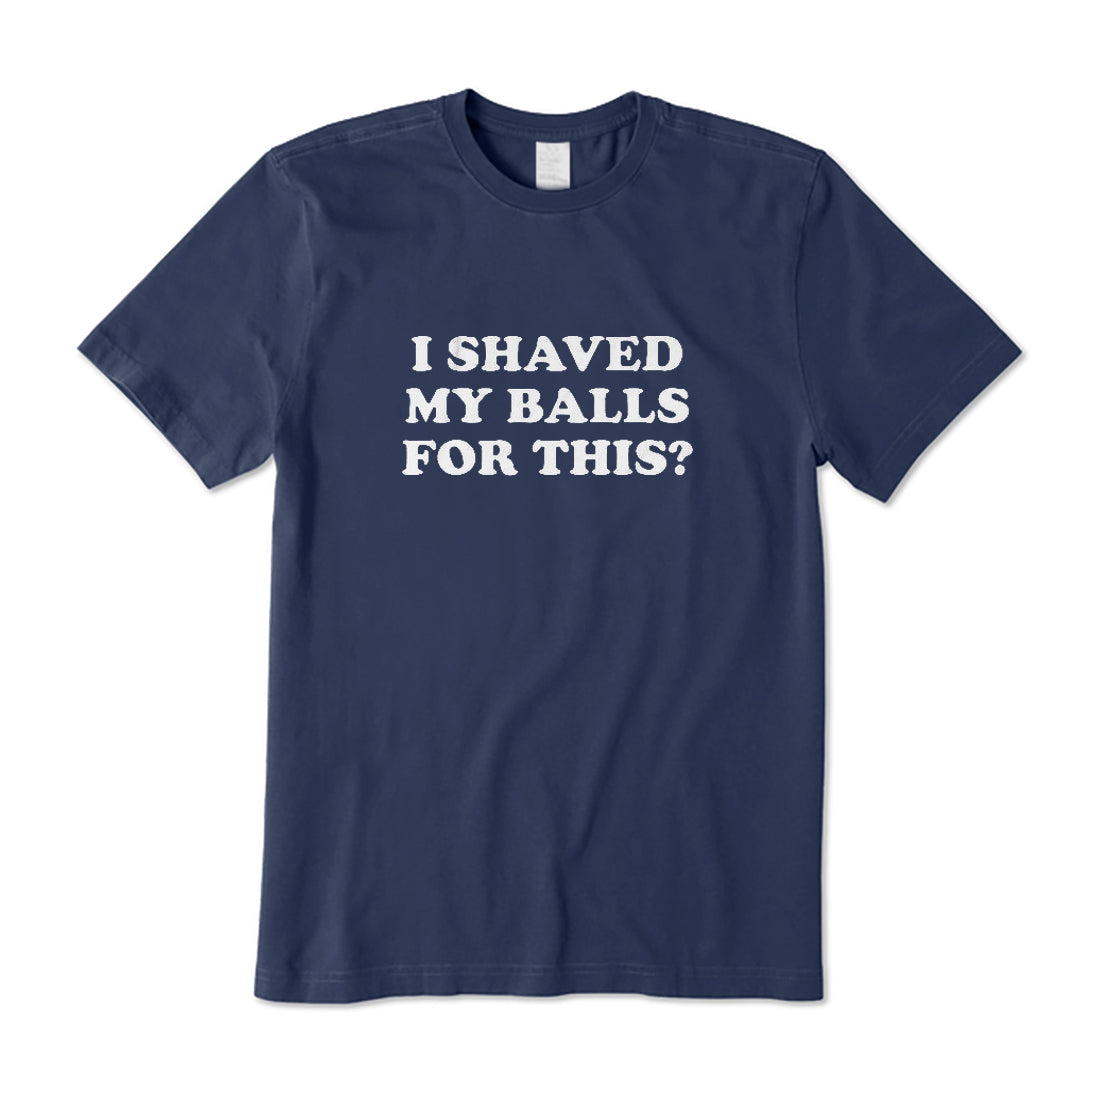 I Shaved My Balls For This? T-Shirt